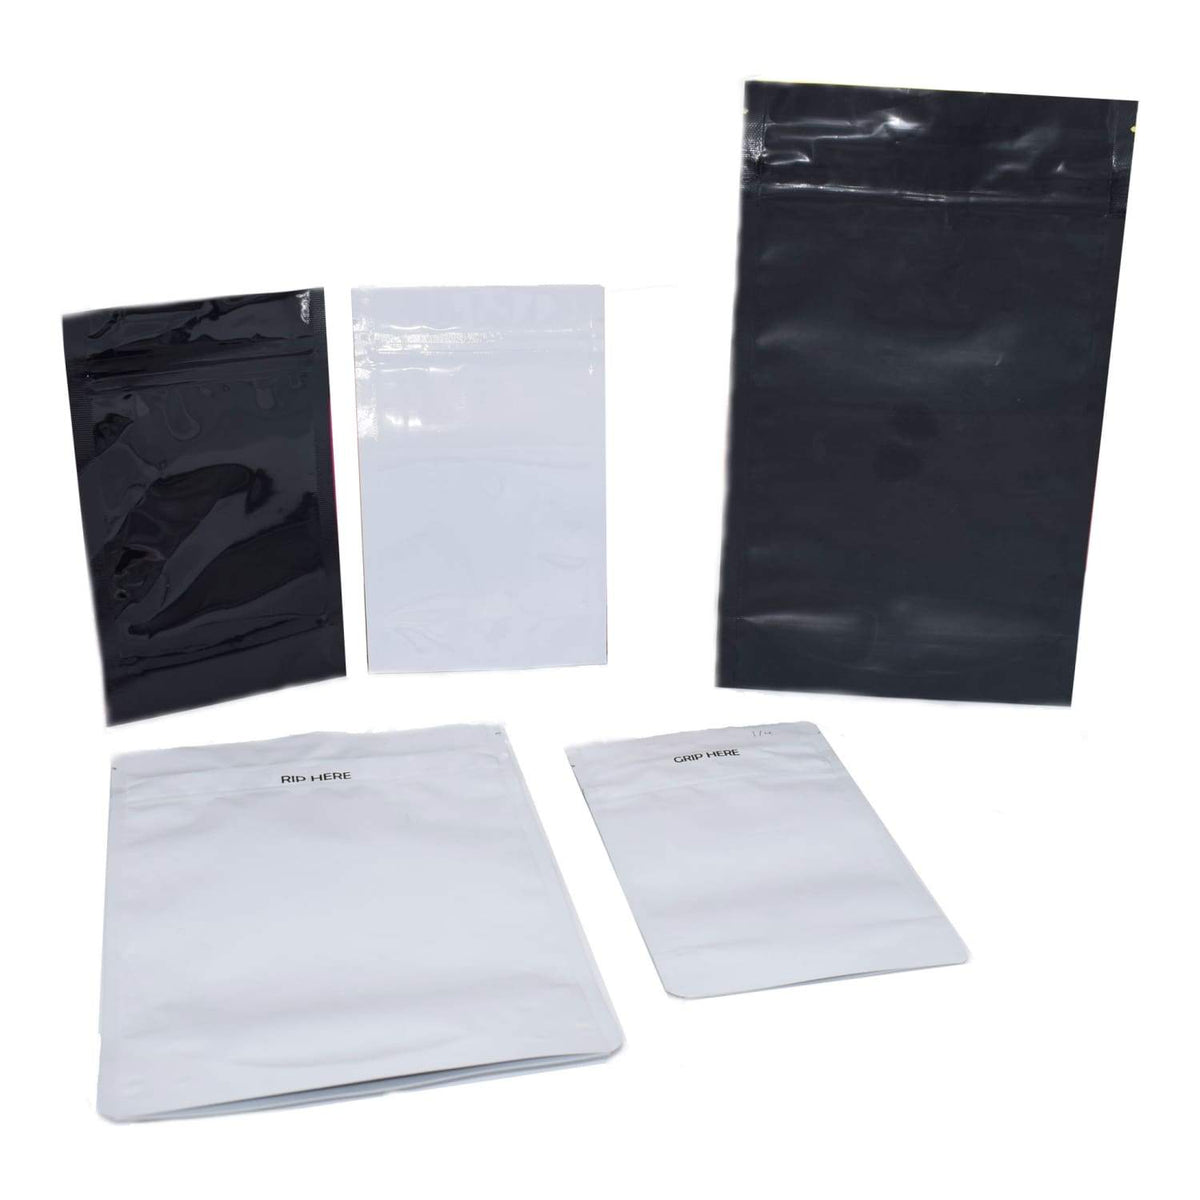 Plastic Heat Sealable Bags - Single Seal Window - Rectangle - White - 7.1  - Small - 100 Count Box